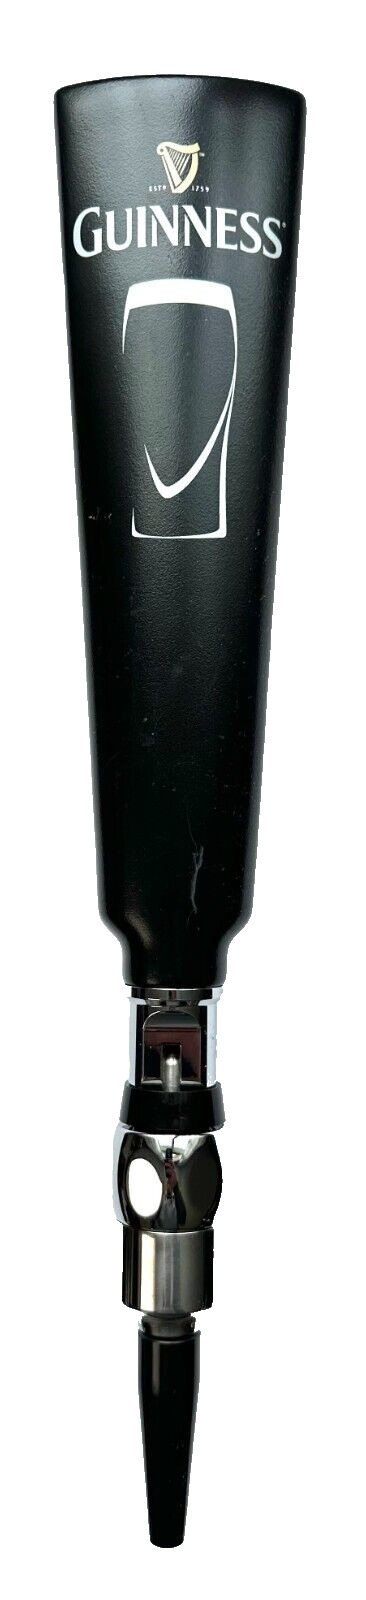 GUINNESS - IRISH STOUT (Includes NITRO FAUCET) - BEER TAP HANDLE (DRAUGHT)